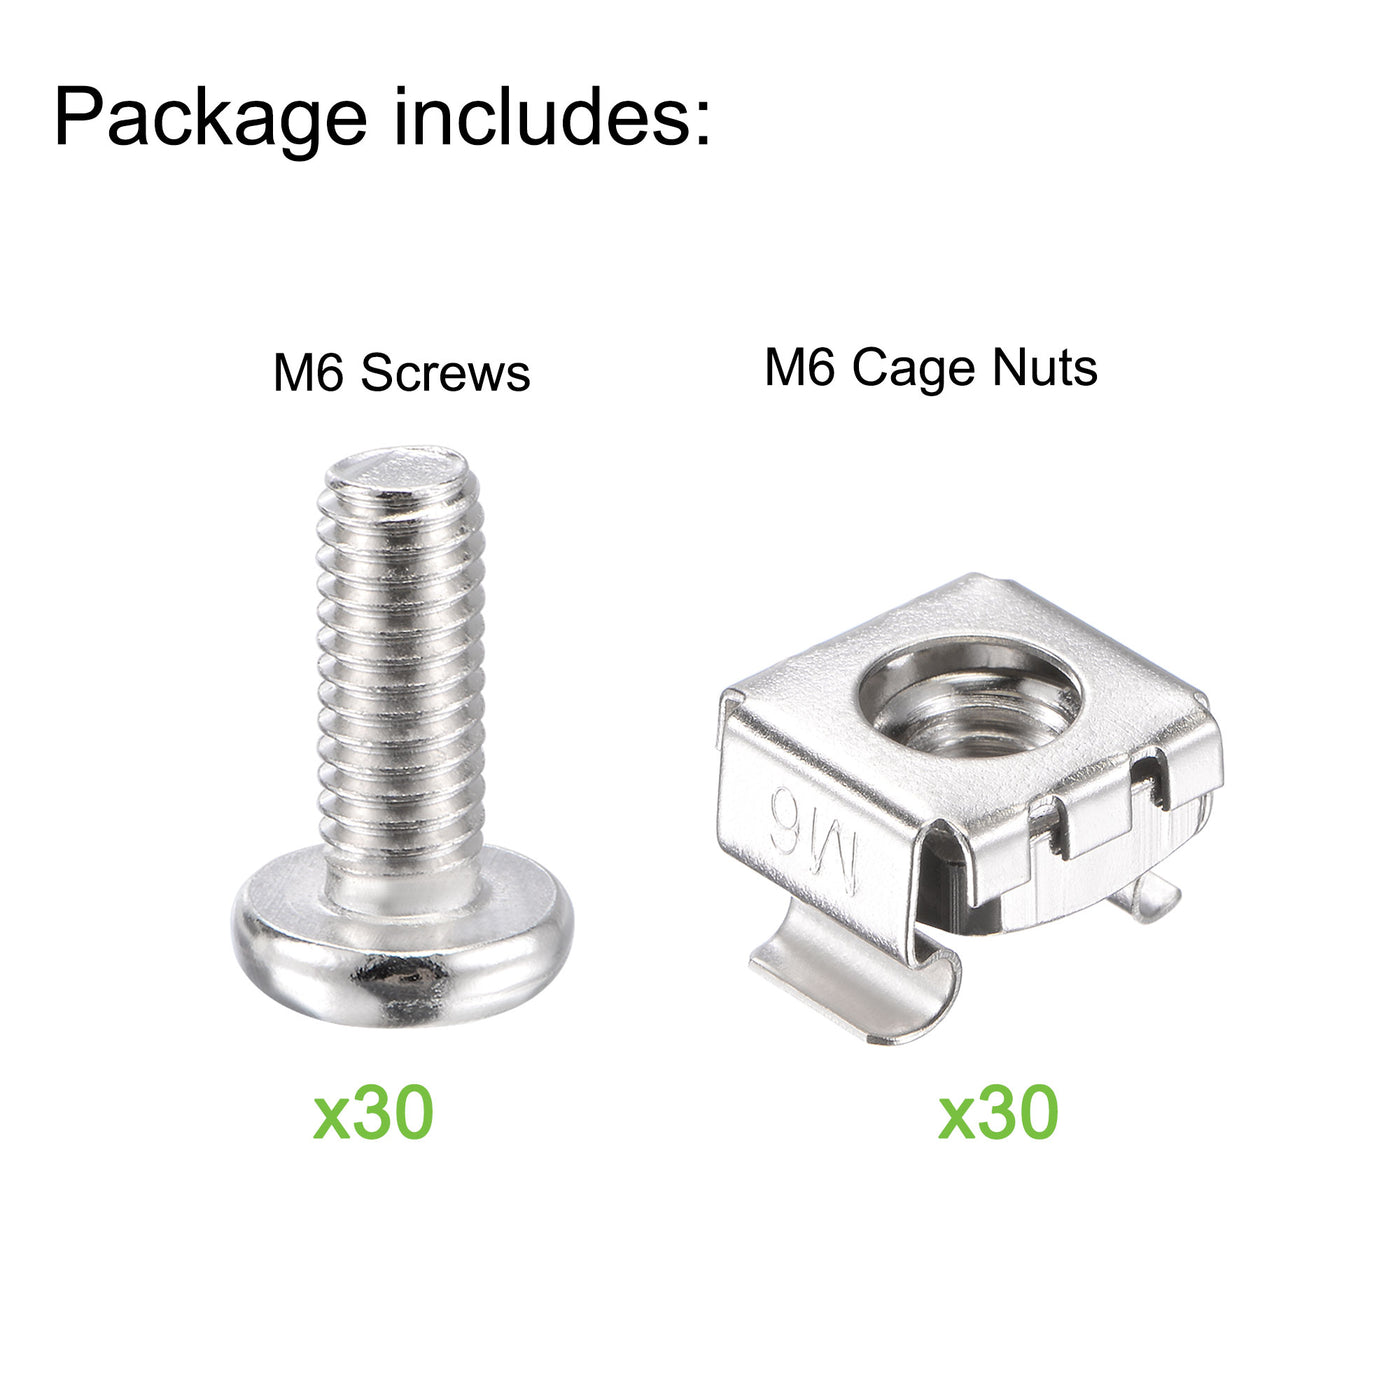 uxcell Uxcell Rack Screws, M6x16mm Screws and Cage Nuts 30Set for Server Shelf Rack